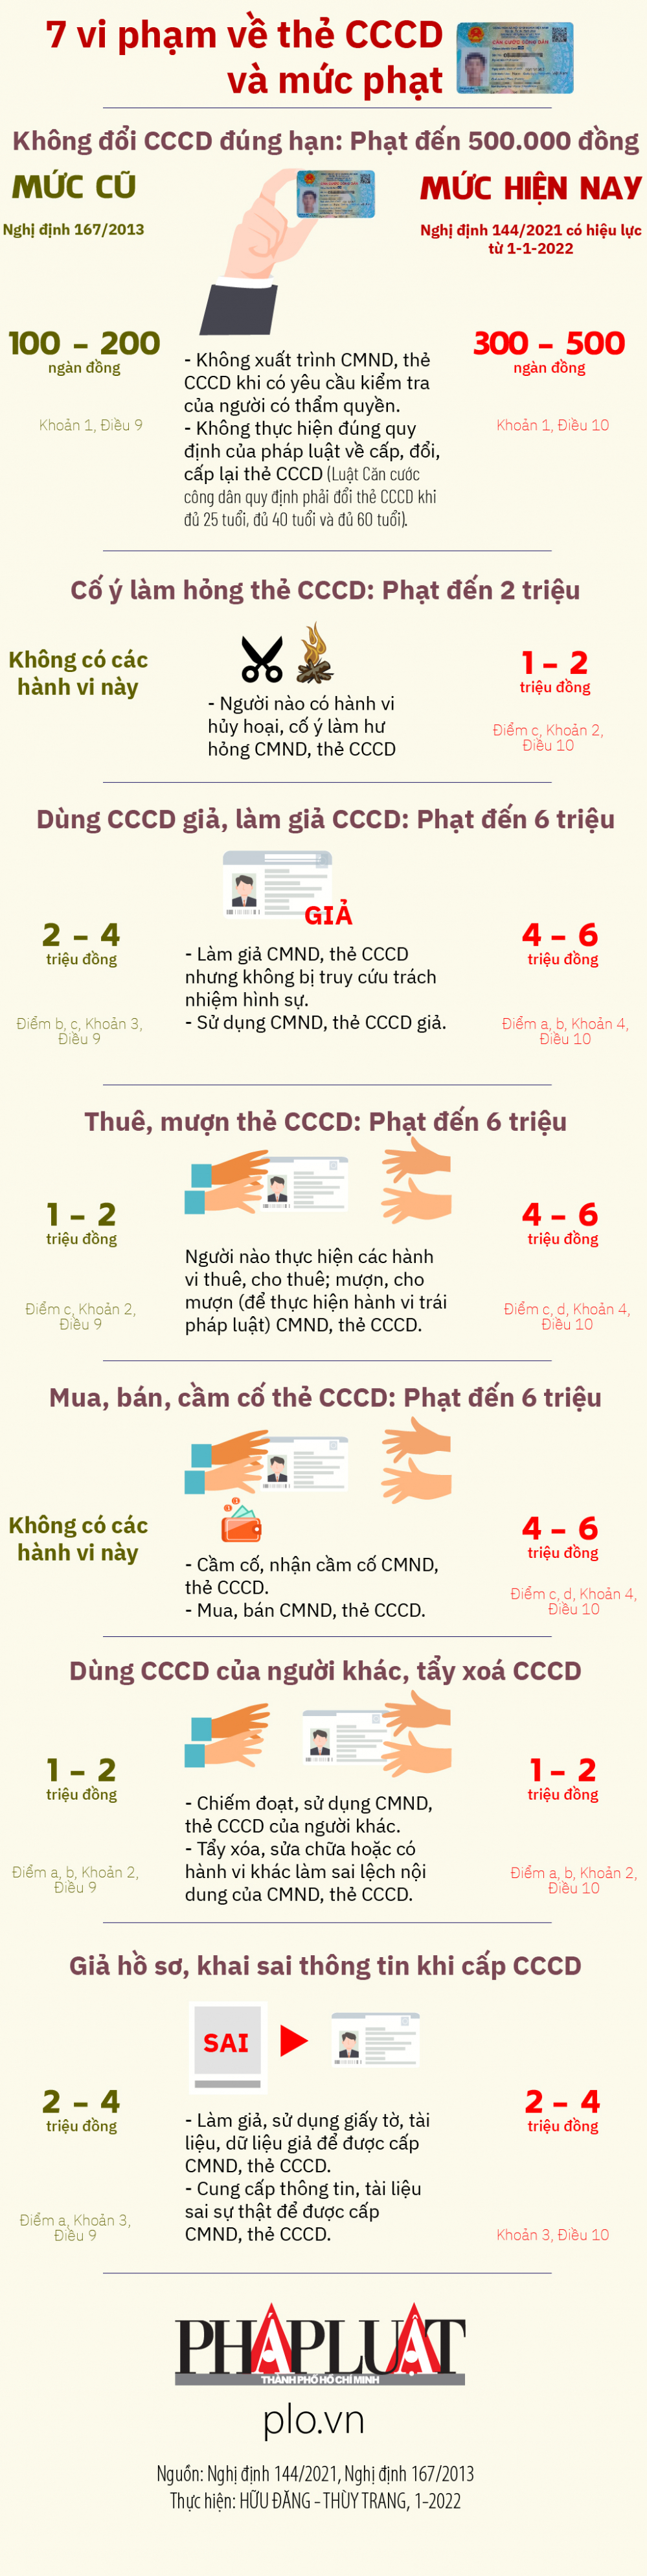 infographic-the-cccd-7-muc-phat-2022-01_hahs